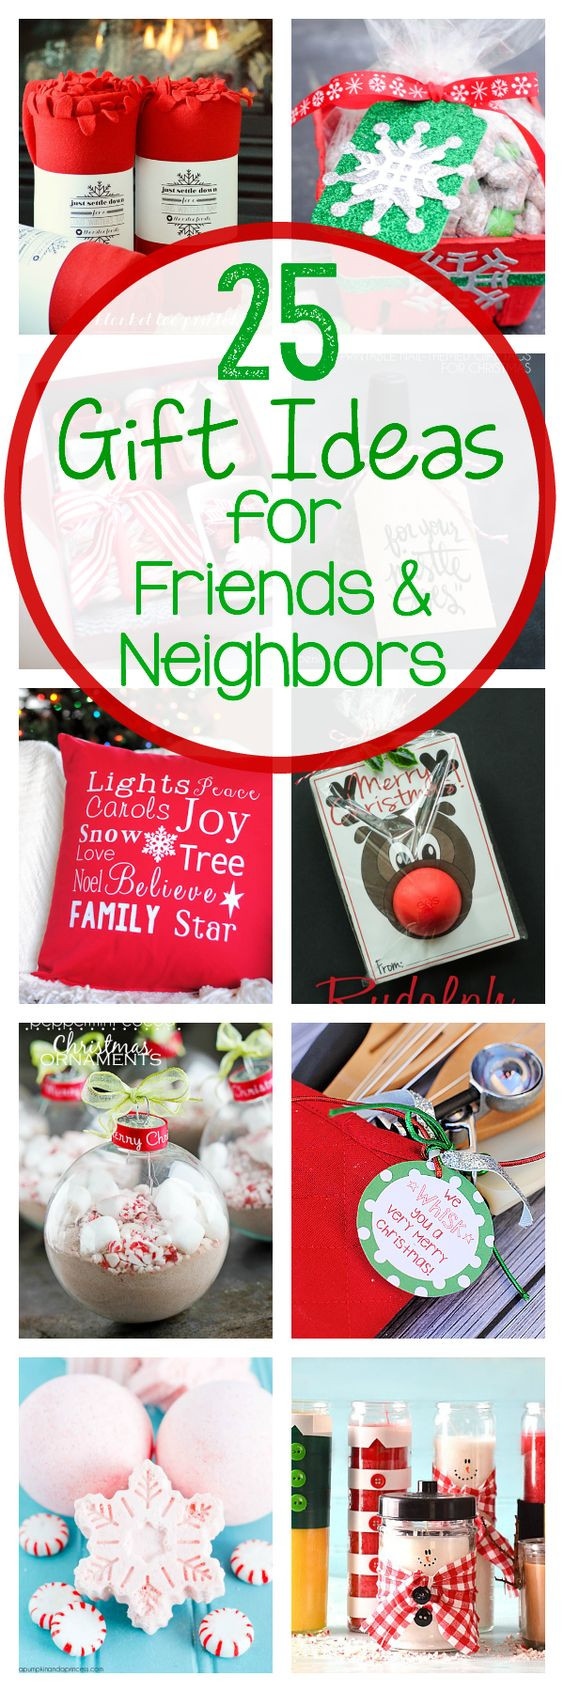 Great Gift Ideas For Best Friends
 25 Gift Ideas for Friends & Neighbors